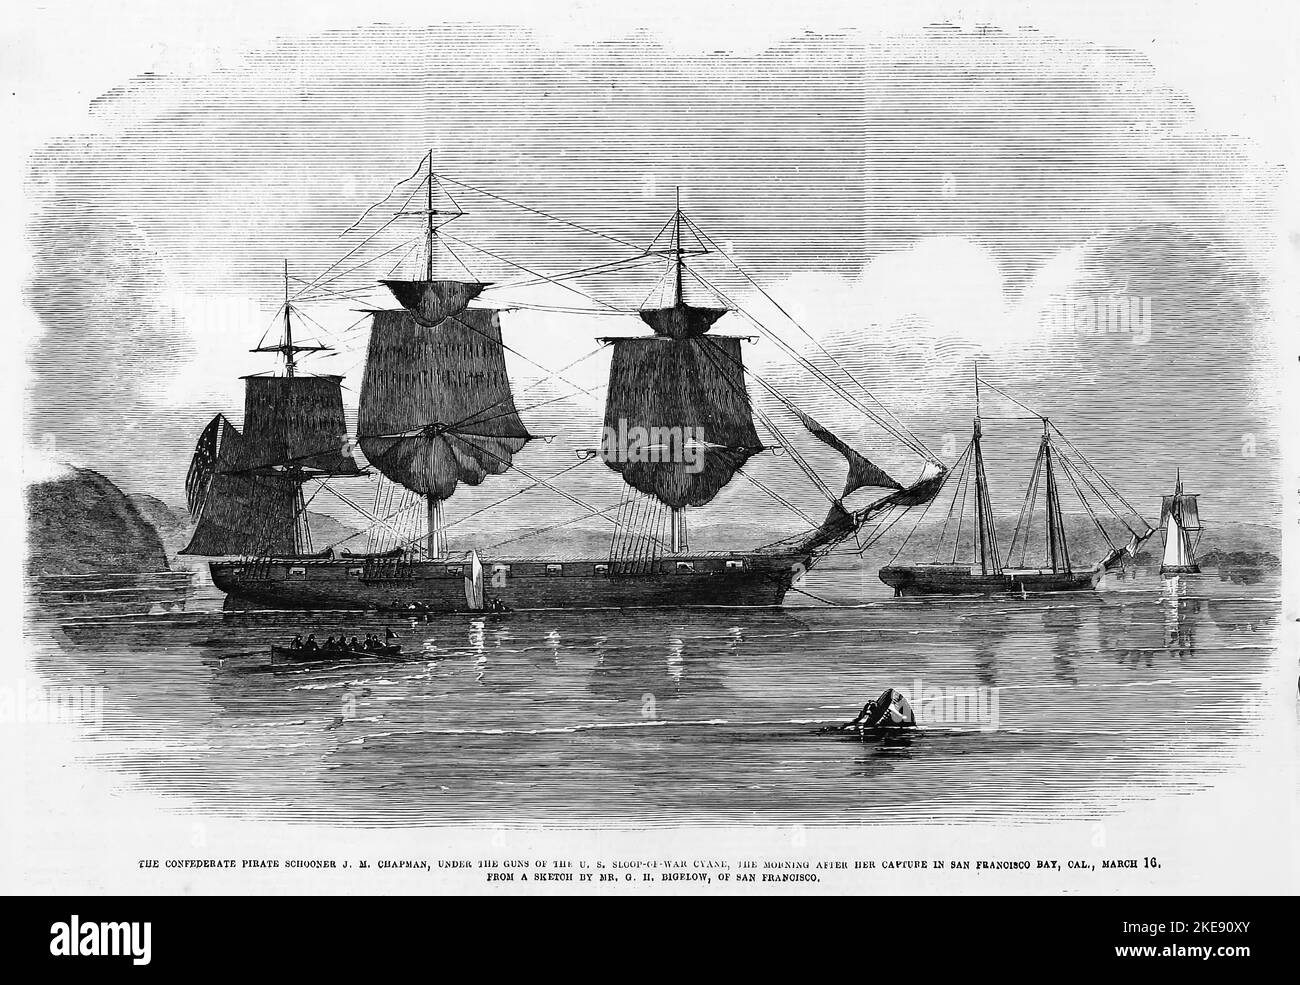 The Confederate pirate schooner J. M. Chapman, under the guns of the U. S. sloop-of-war Cyane, the morning after the capture in San Francisco Bay, California, March 16th, 1863. 19th century American Civil War illustration from Frank Leslie's Illustrated Newspaper Stock Photo